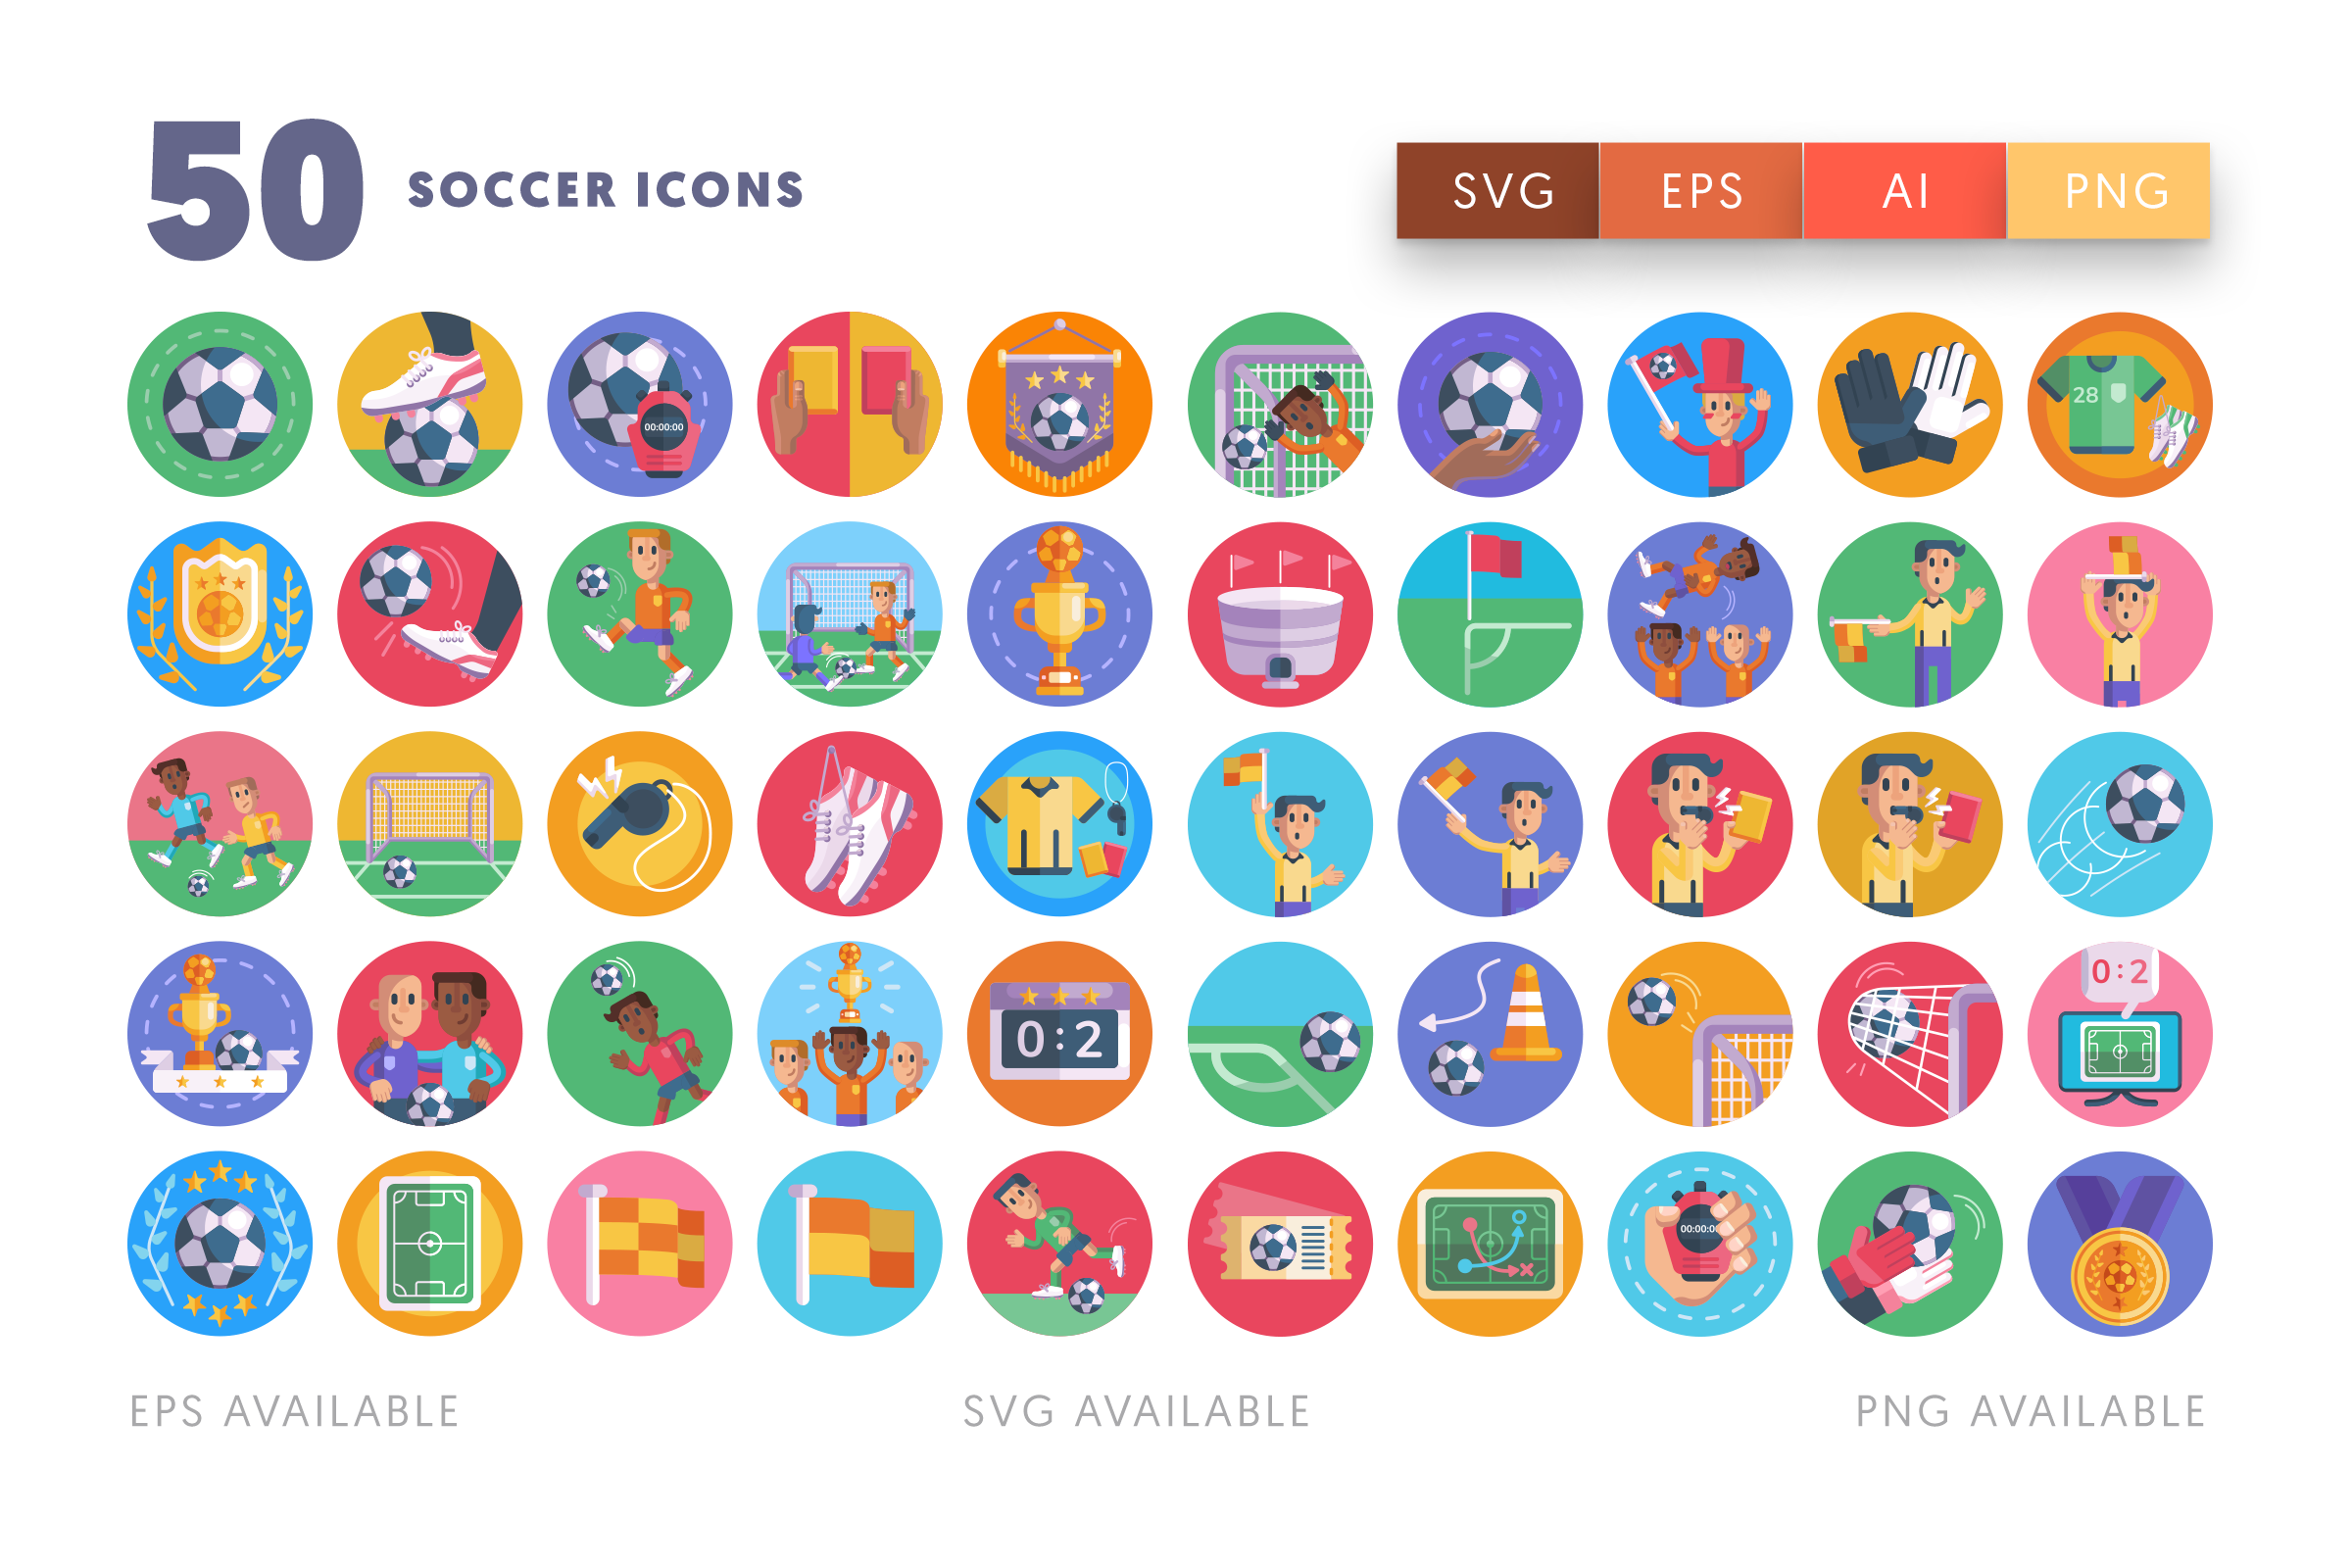 Soccer icons png/svg/eps